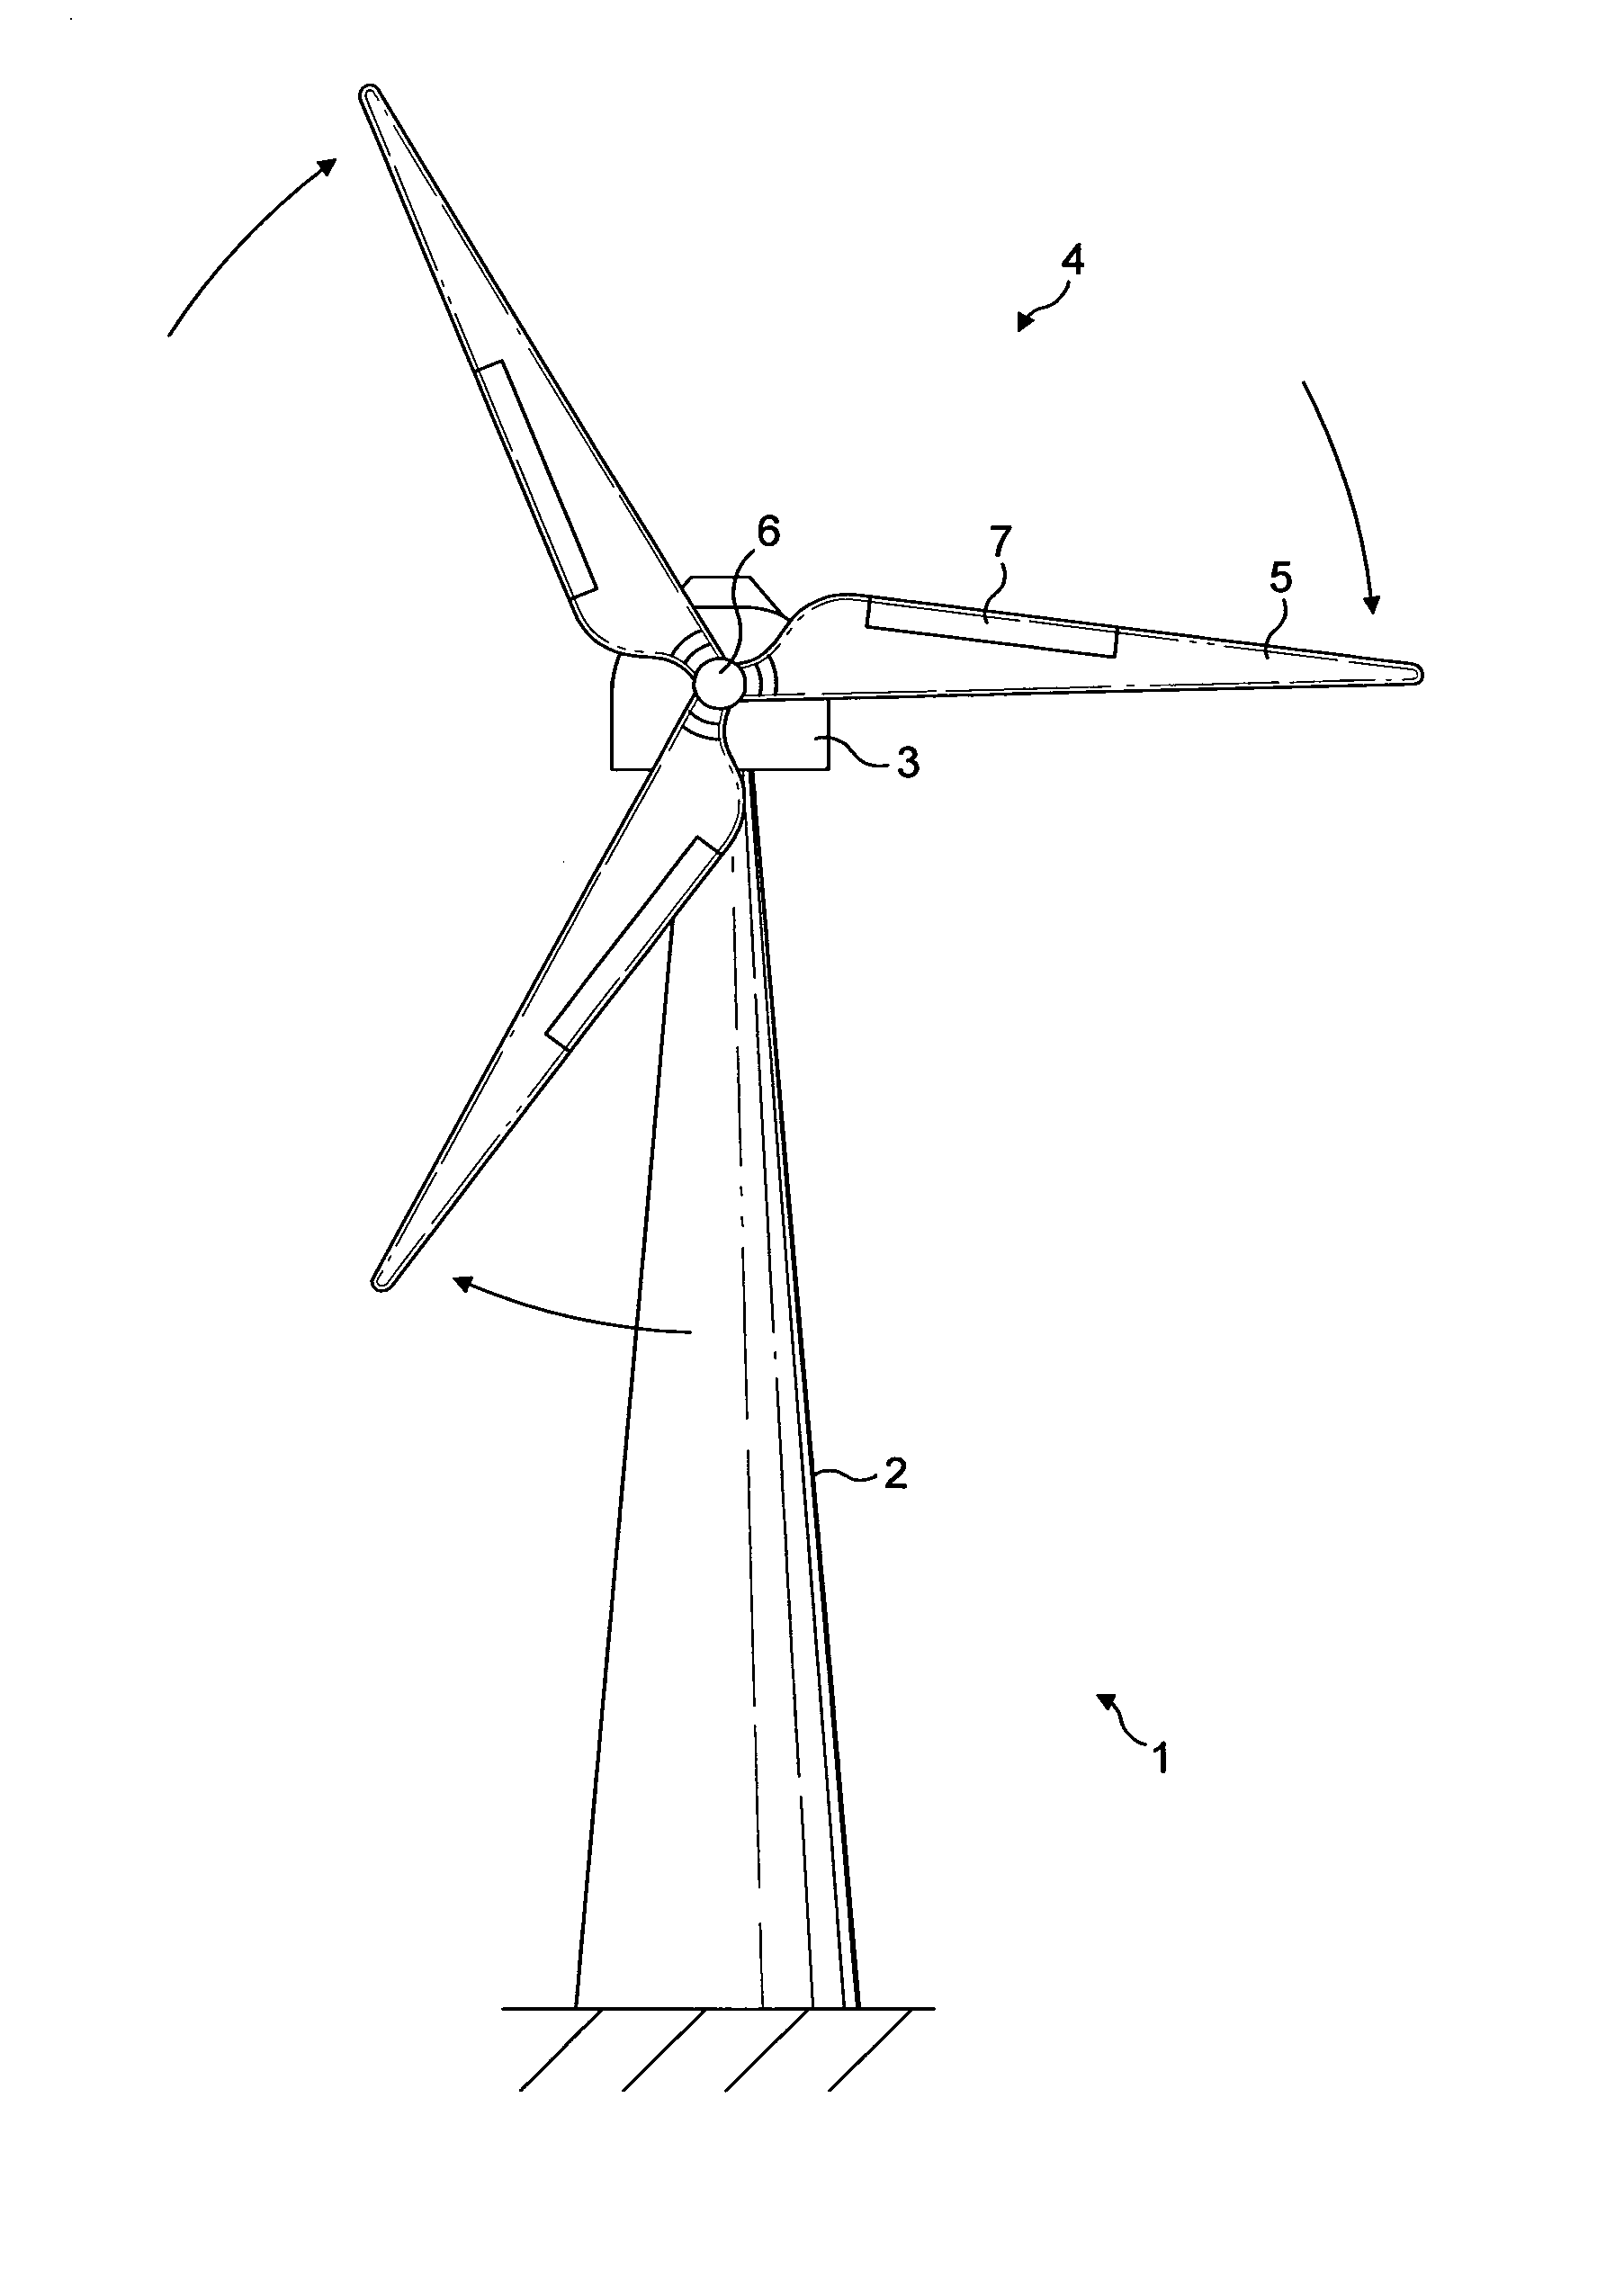 Hinge apparatus for connecting first and second wind turbine blade components comprising a rotary actuator